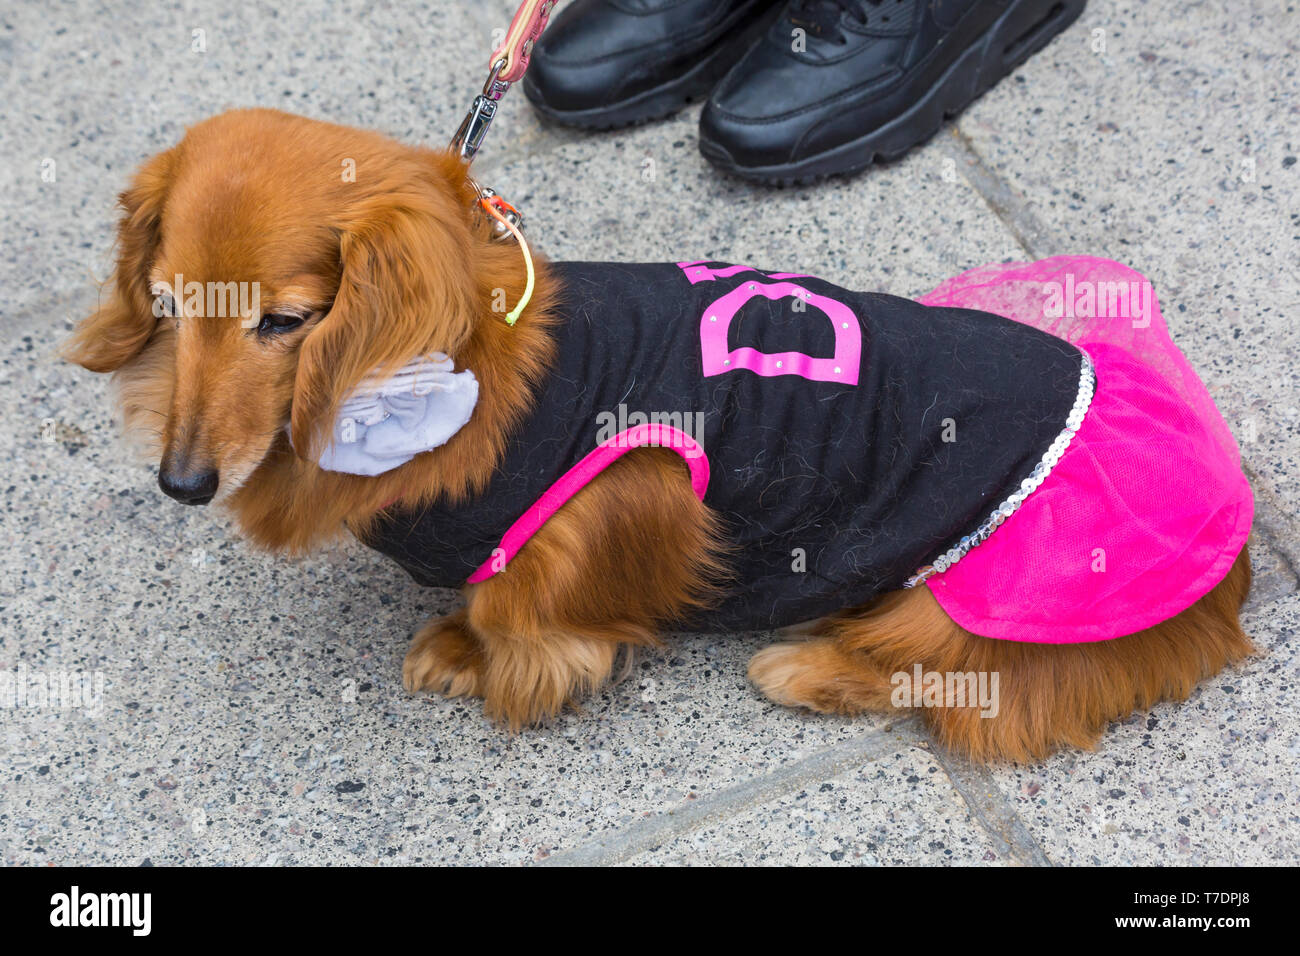 Boscombe, Bournemouth, Dorset, UK. 6th May 2019. Dachshund Dash, part of Bournemouth Emerging Arts Fringe (BEAF) Festival invites dachshunds and their owners to gather under the Daschund artwork to see how many they can gather in one place. The Diva!Credit: Carolyn Jenkins/Alamy Live News Stock Photo